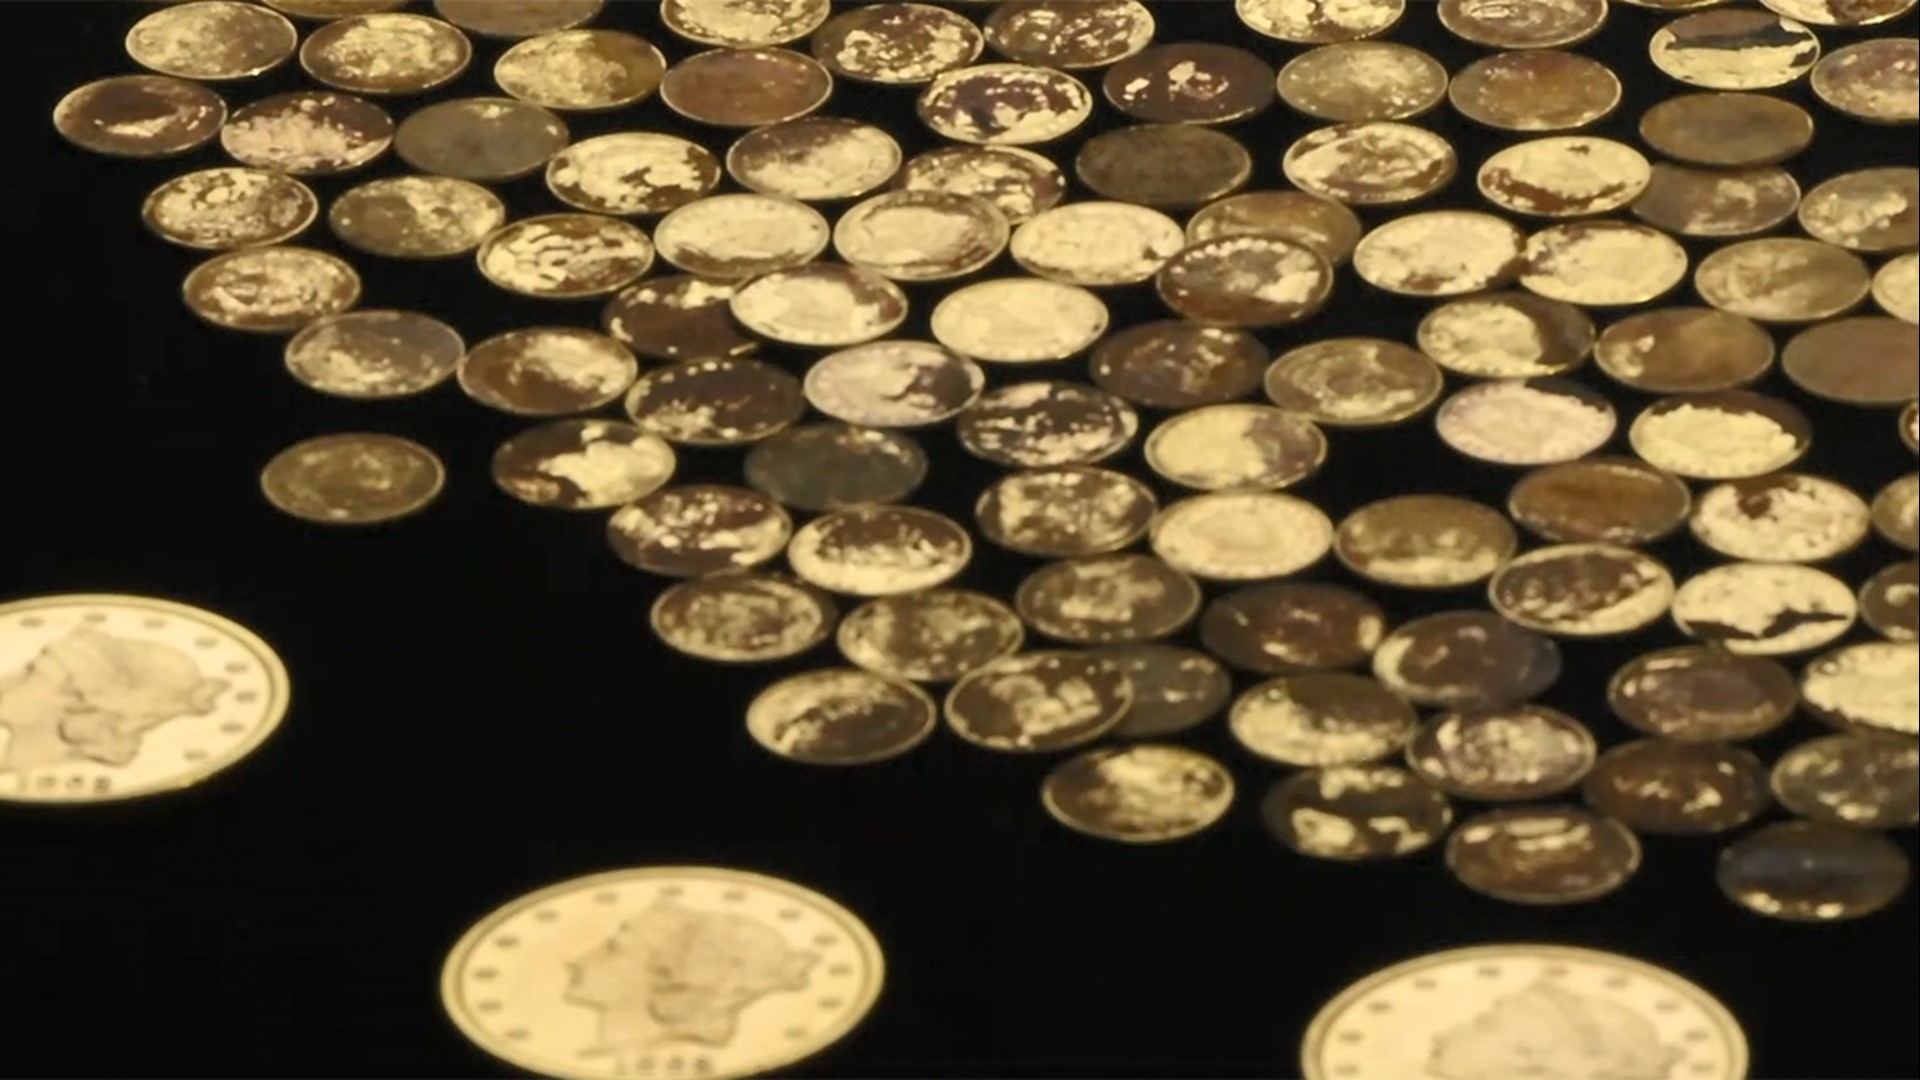 More than 700 rare U.S. gold coins were recently unearthed in a Kentucky cornfield.